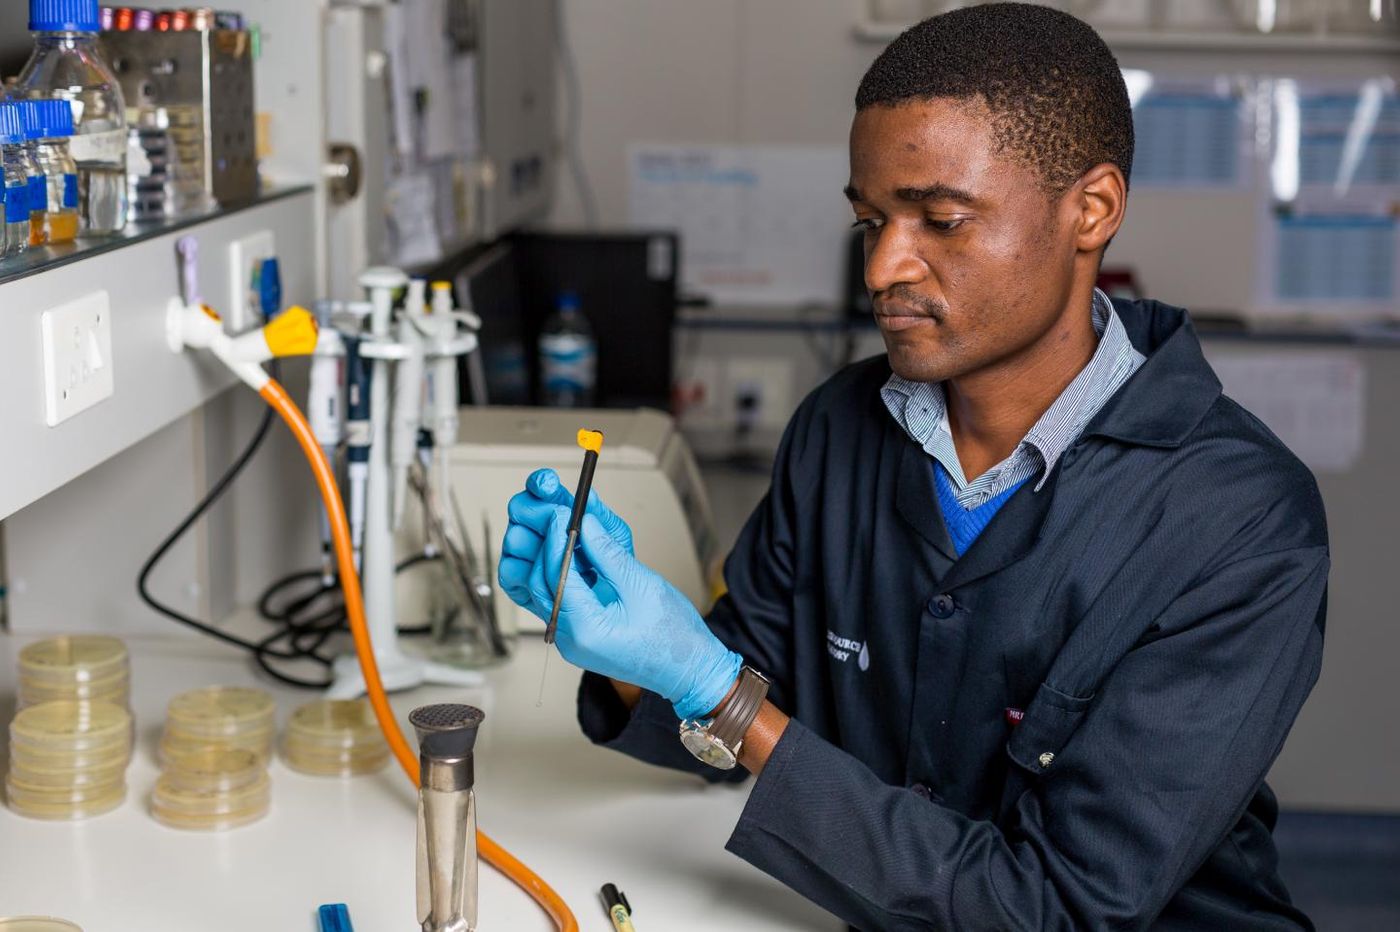 This is South African microbiologist, Dr Thando Ndlovu in his laboratory in the Department Microbiology, Stellenbosch University. / Credit: Stefan Els